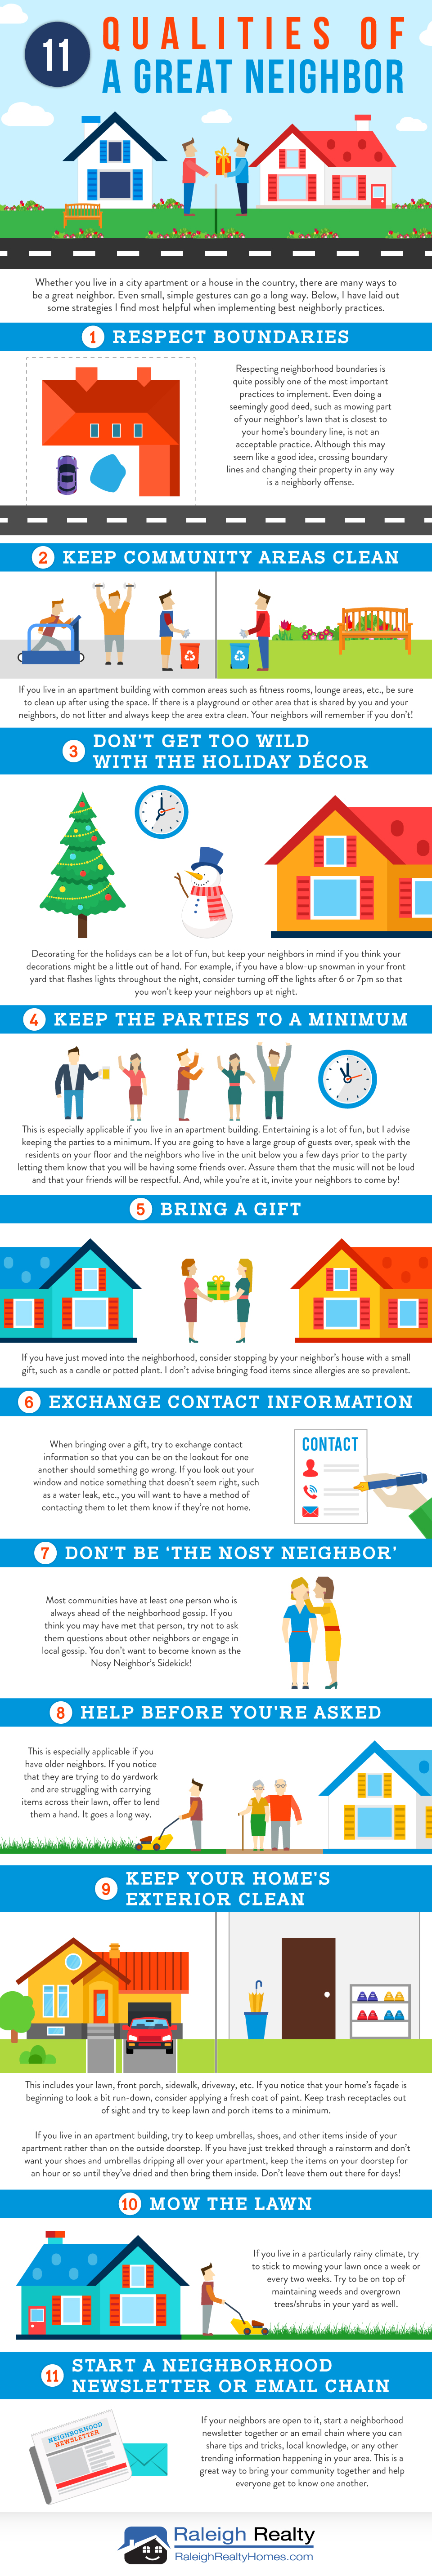 11 Qualities of a Great Neighbor {Number 8 is spot on!}